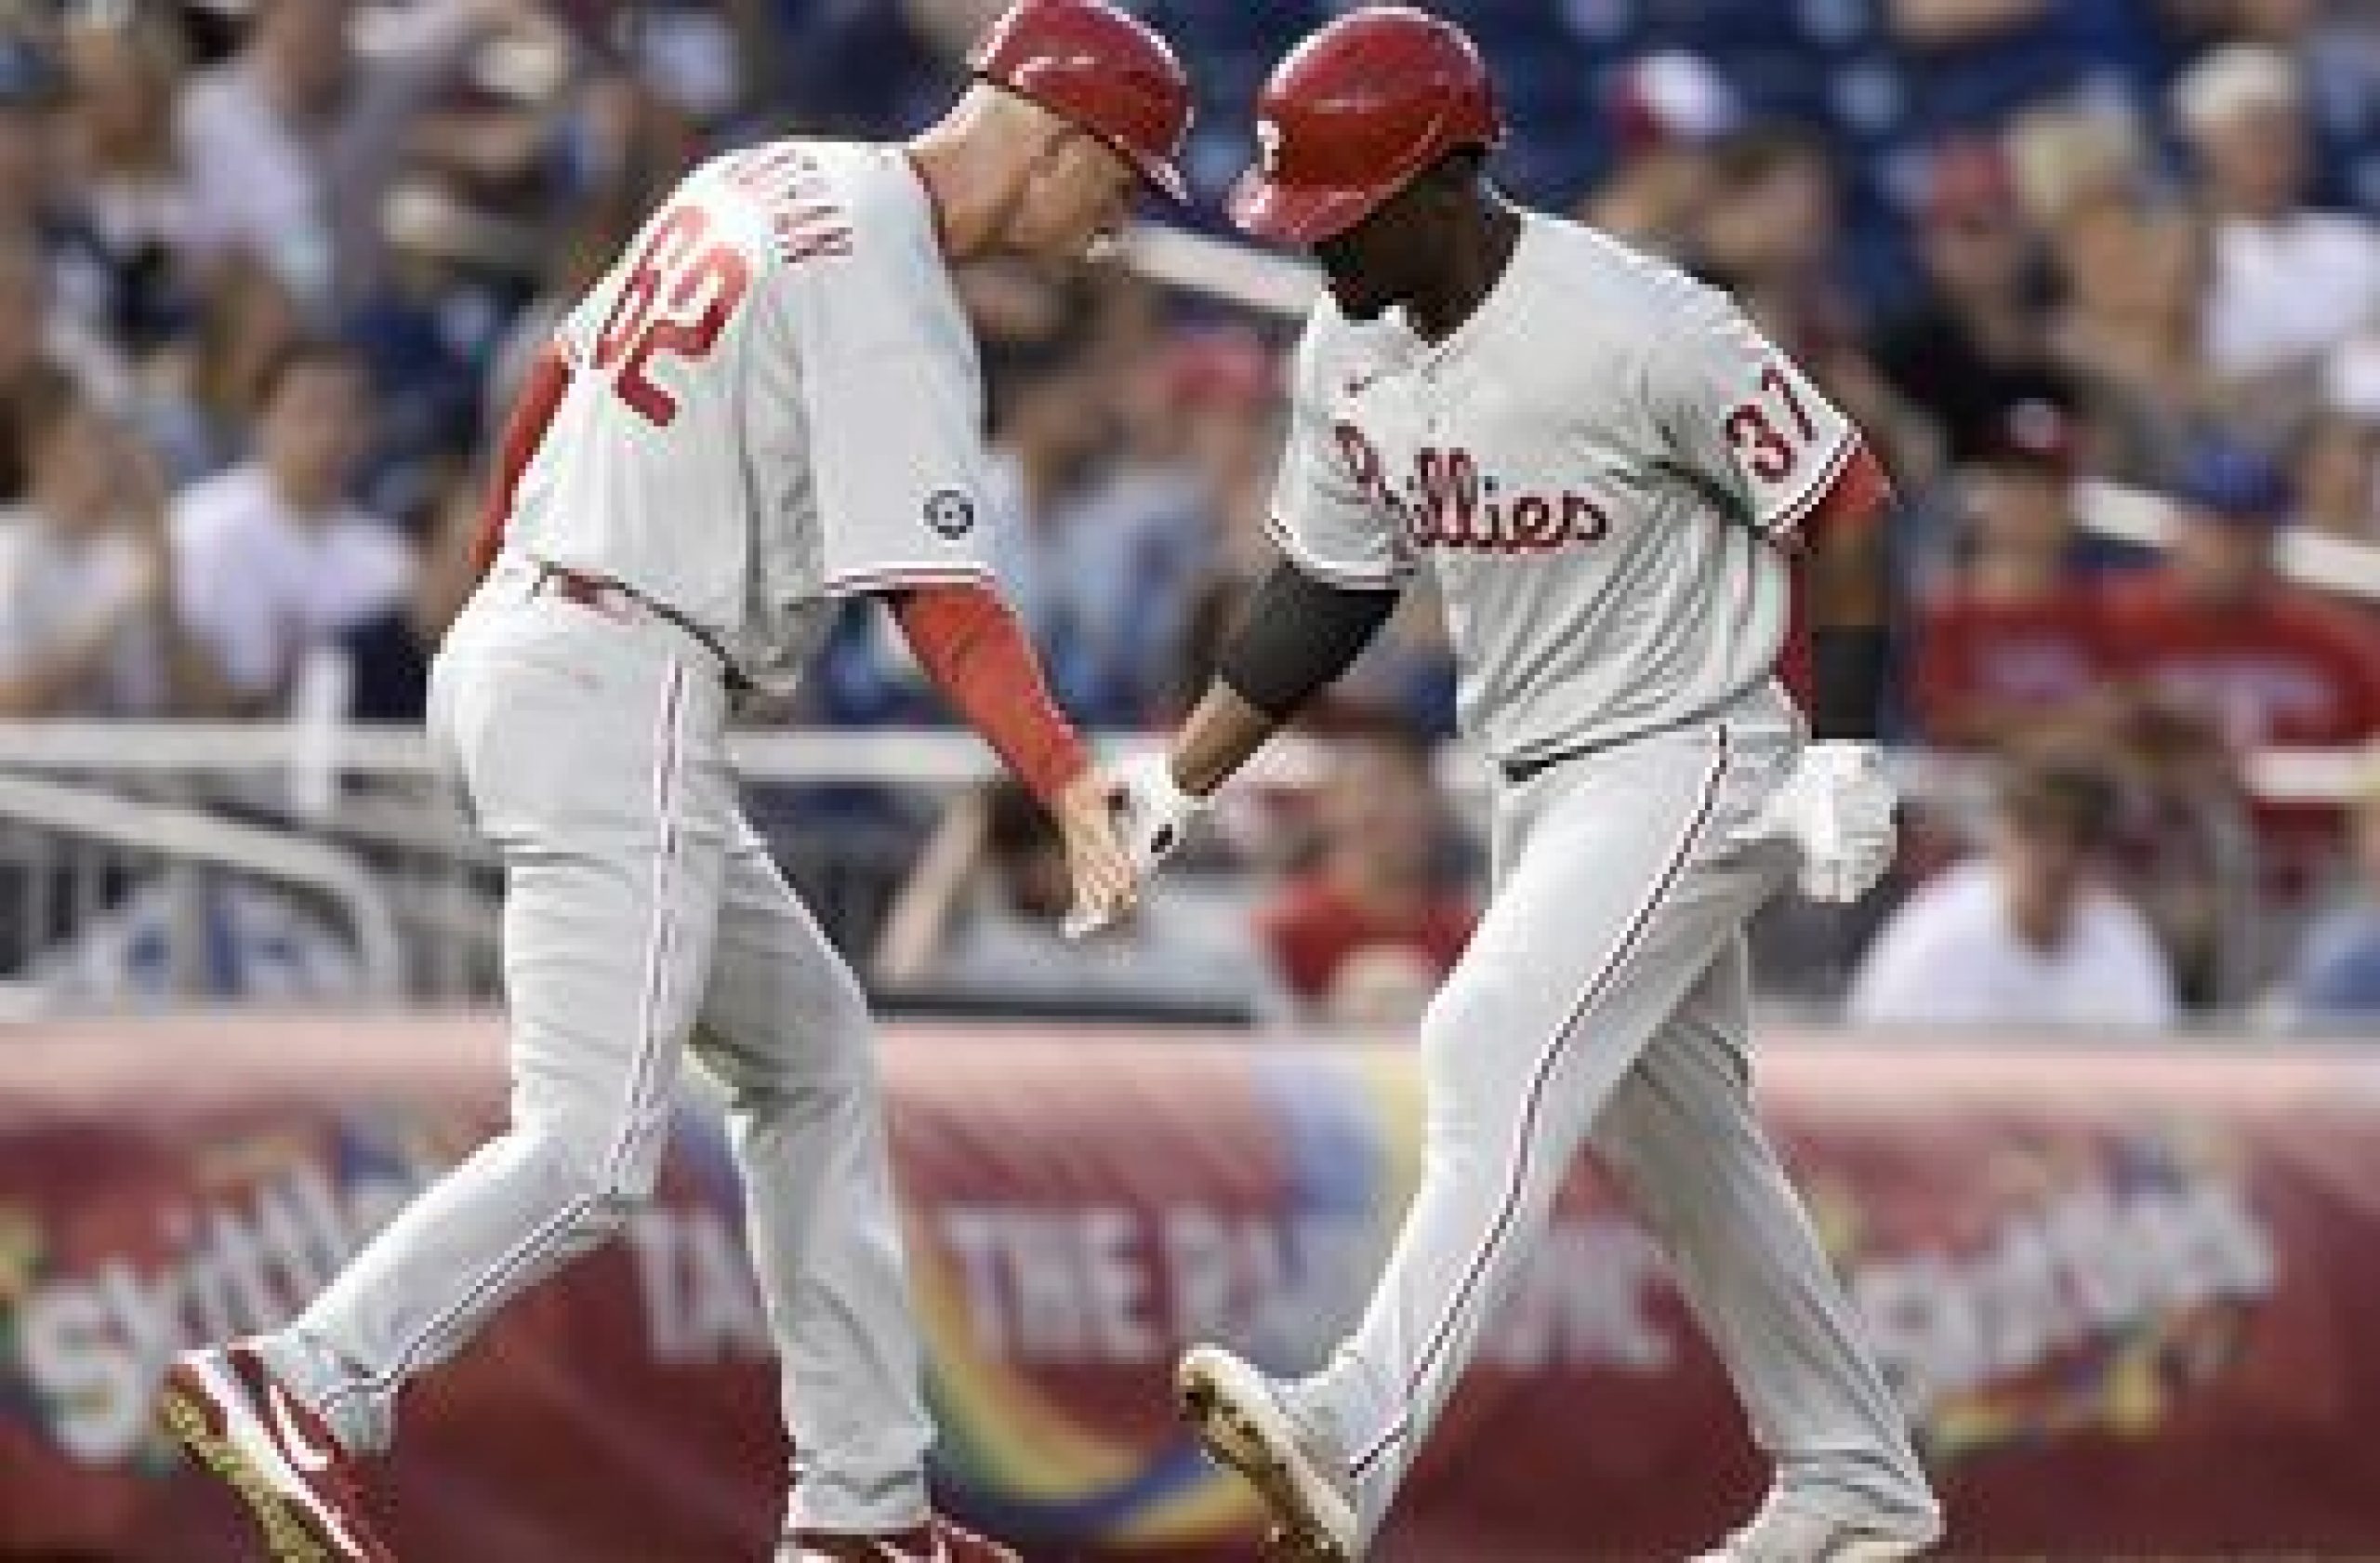 Phillies ride four-run ninth inning to 6-5 win over Nationals